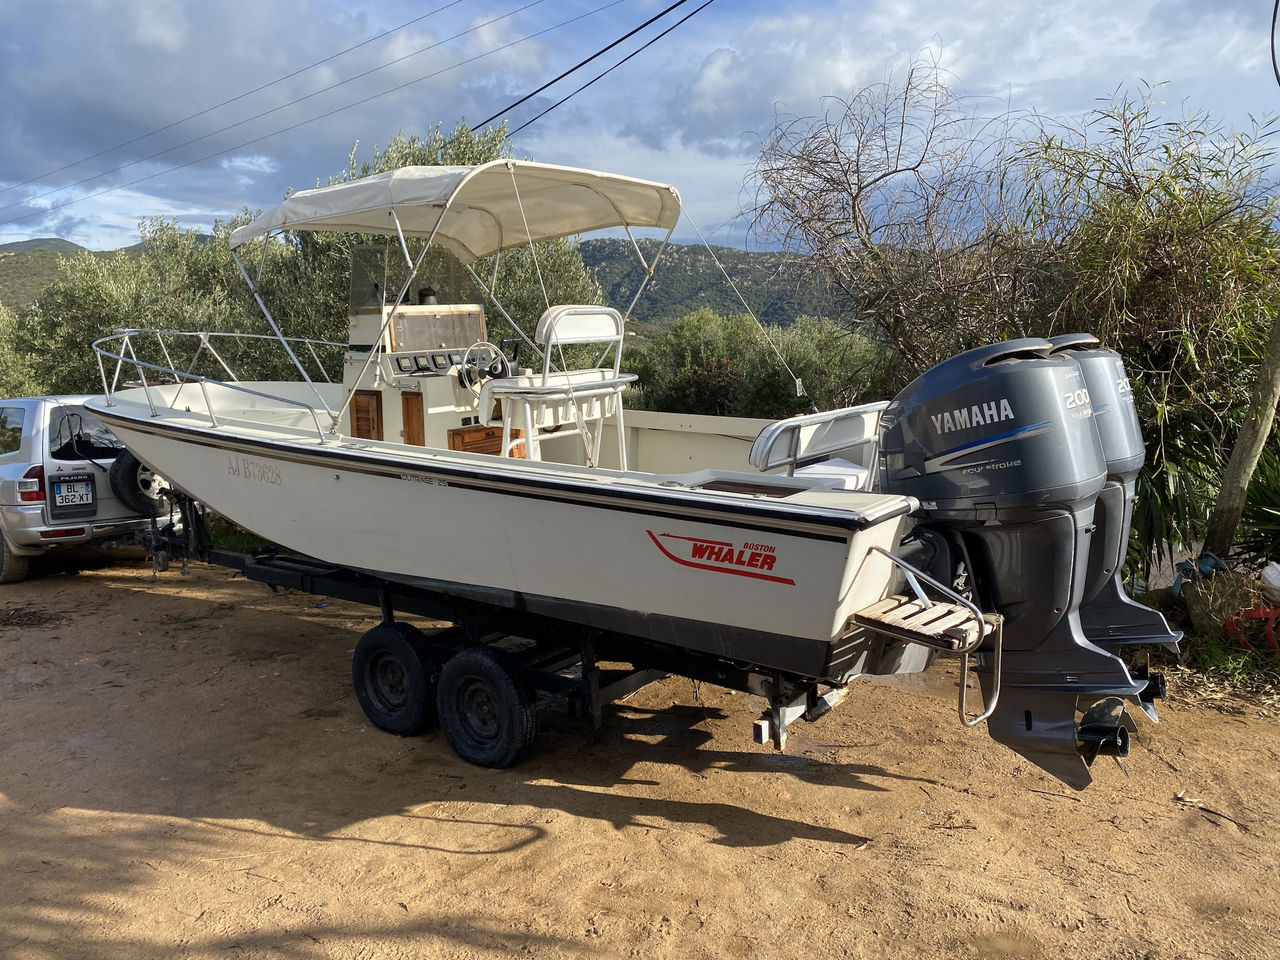 Boston Whaler Outrage 25 - immagine 2